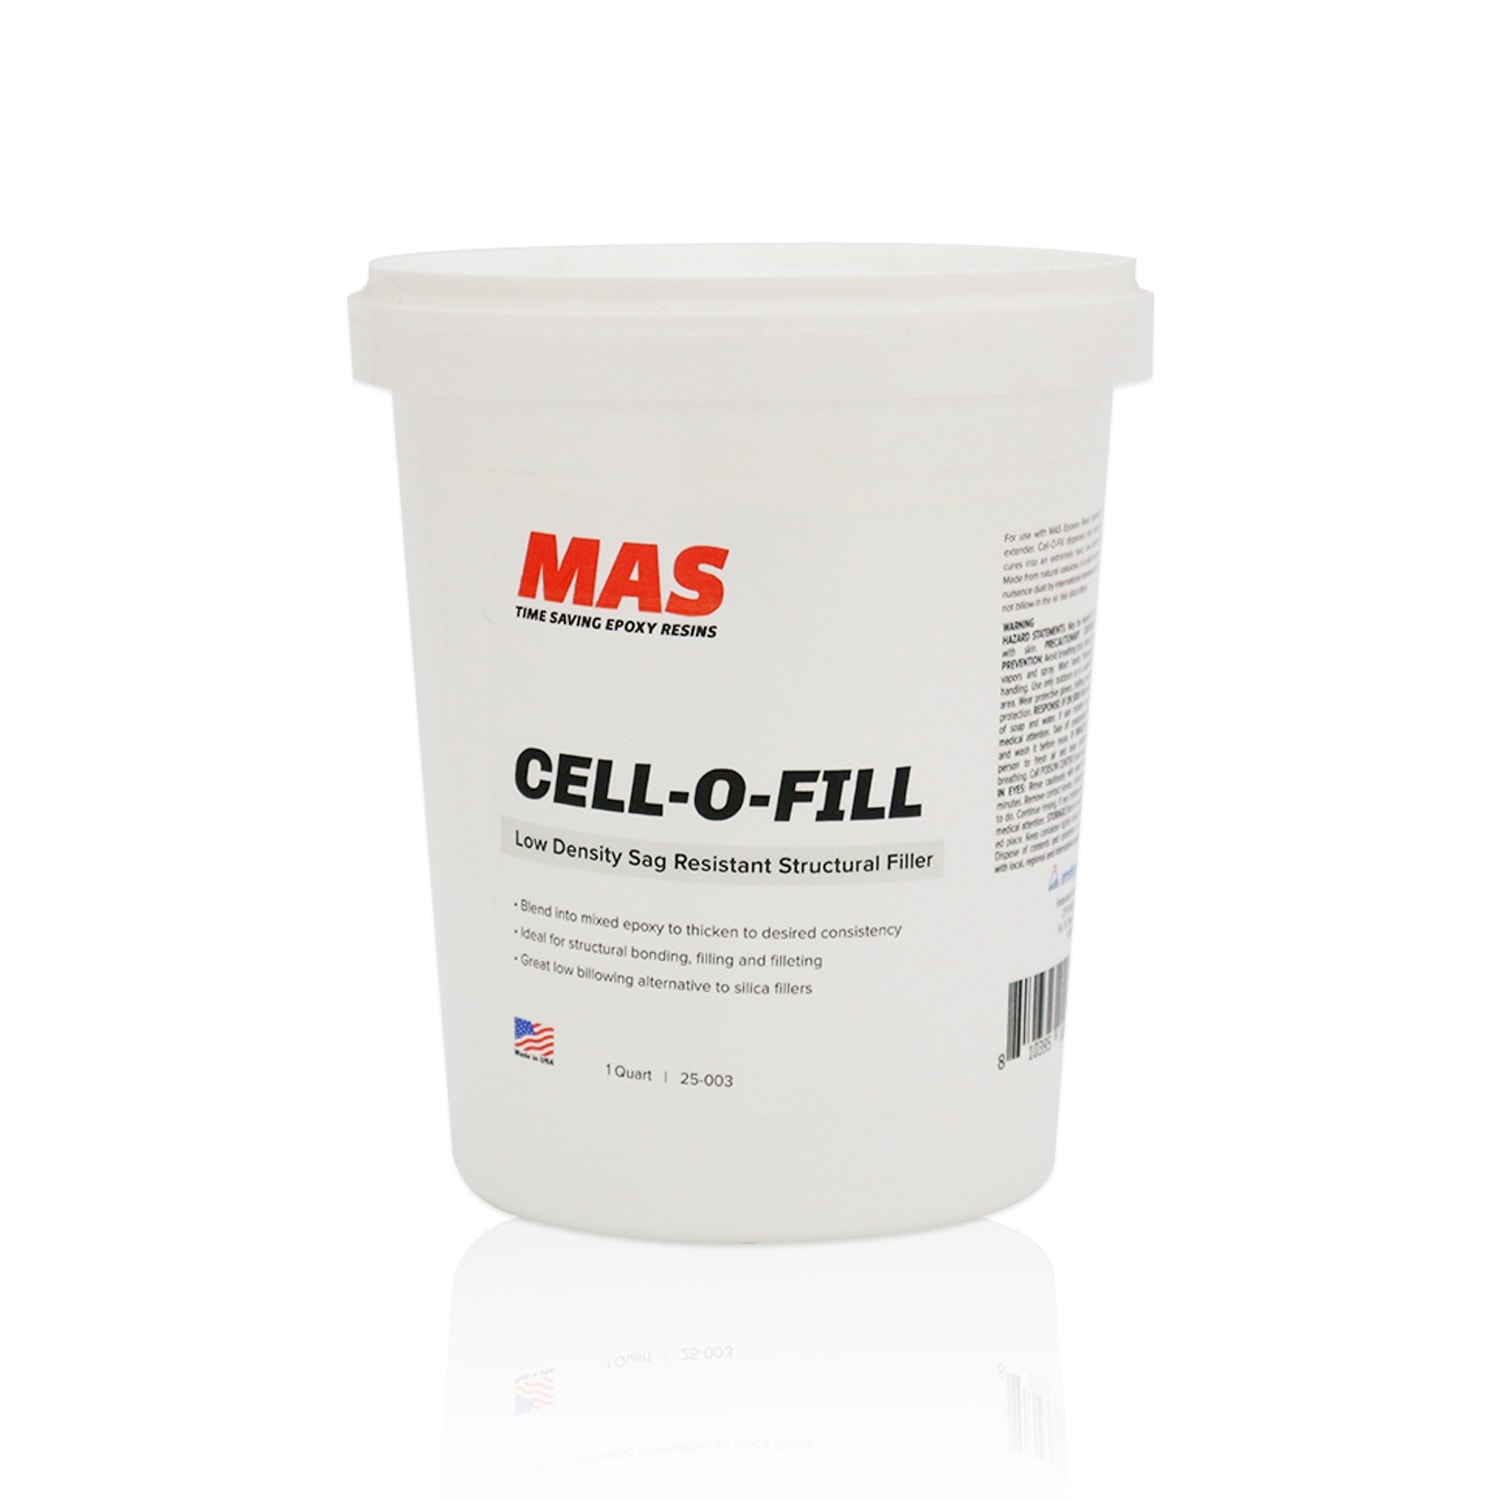 can  use cell o fill epoxy over a marine primer coat?